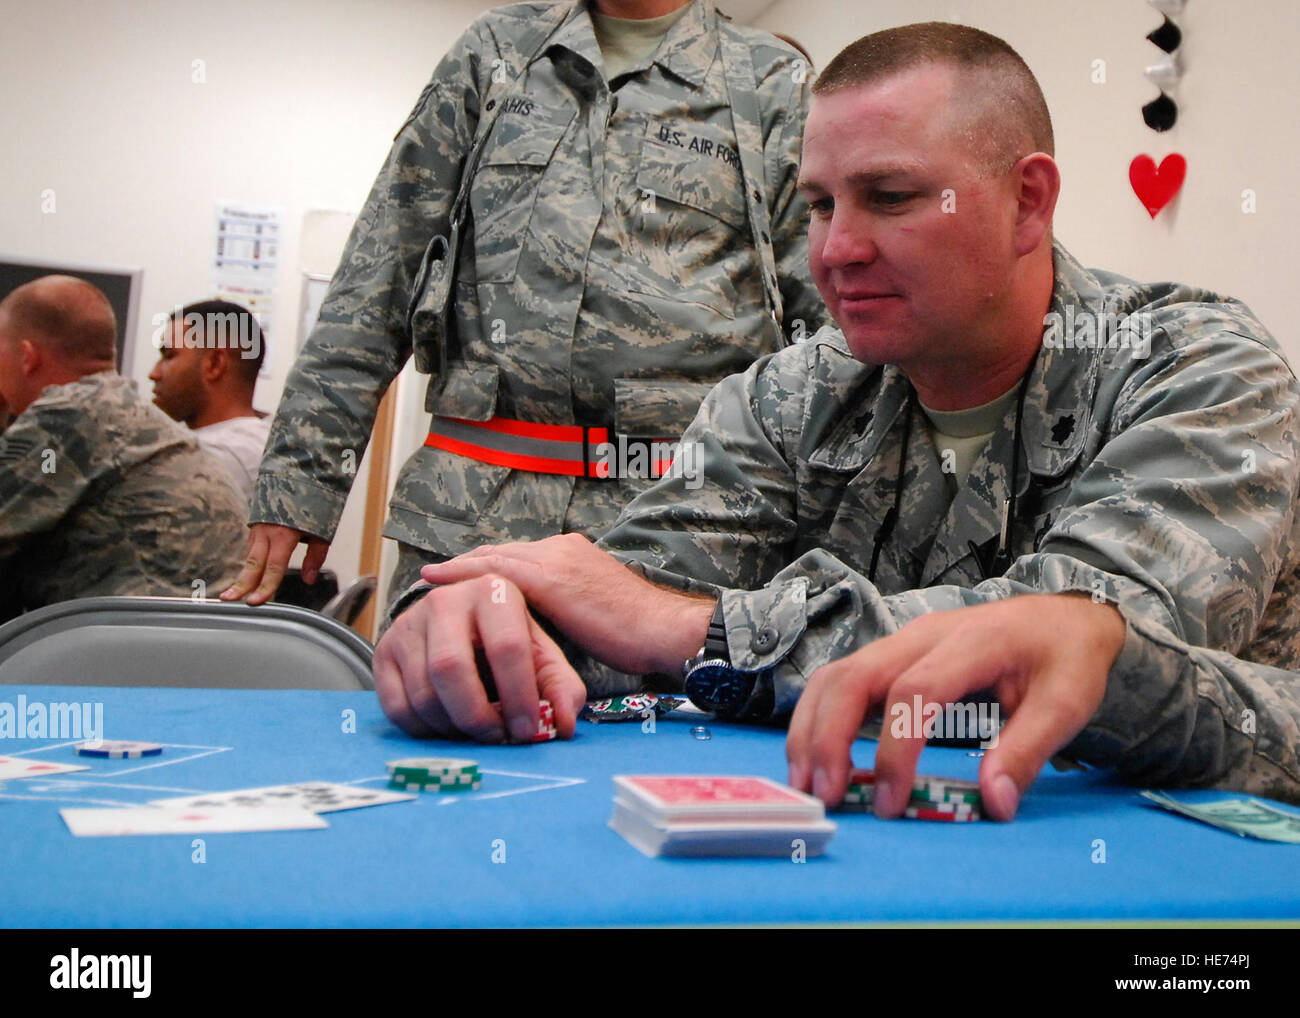 Lt. Col. Tommy James, vice commander of the 455th Expeditionary Mission Support Group, anxiously awaits to see the dealers cards during an game of Black Jack, Sept. 28. The 455th Air Expeditionary Wing 5/6 club held the first ever Casino Night, which was a way to bring U.S. and Coalition Forces together for a morale boosting event.  The attendees were given play money to play games such as black jack, poker, craps and roulette. The staff and technical sergeants make up the 5/6 club who provide great ways to spread morale. Col. James, a Rogersville, Ala. native, is deployed from the Alabama Air Stock Photo